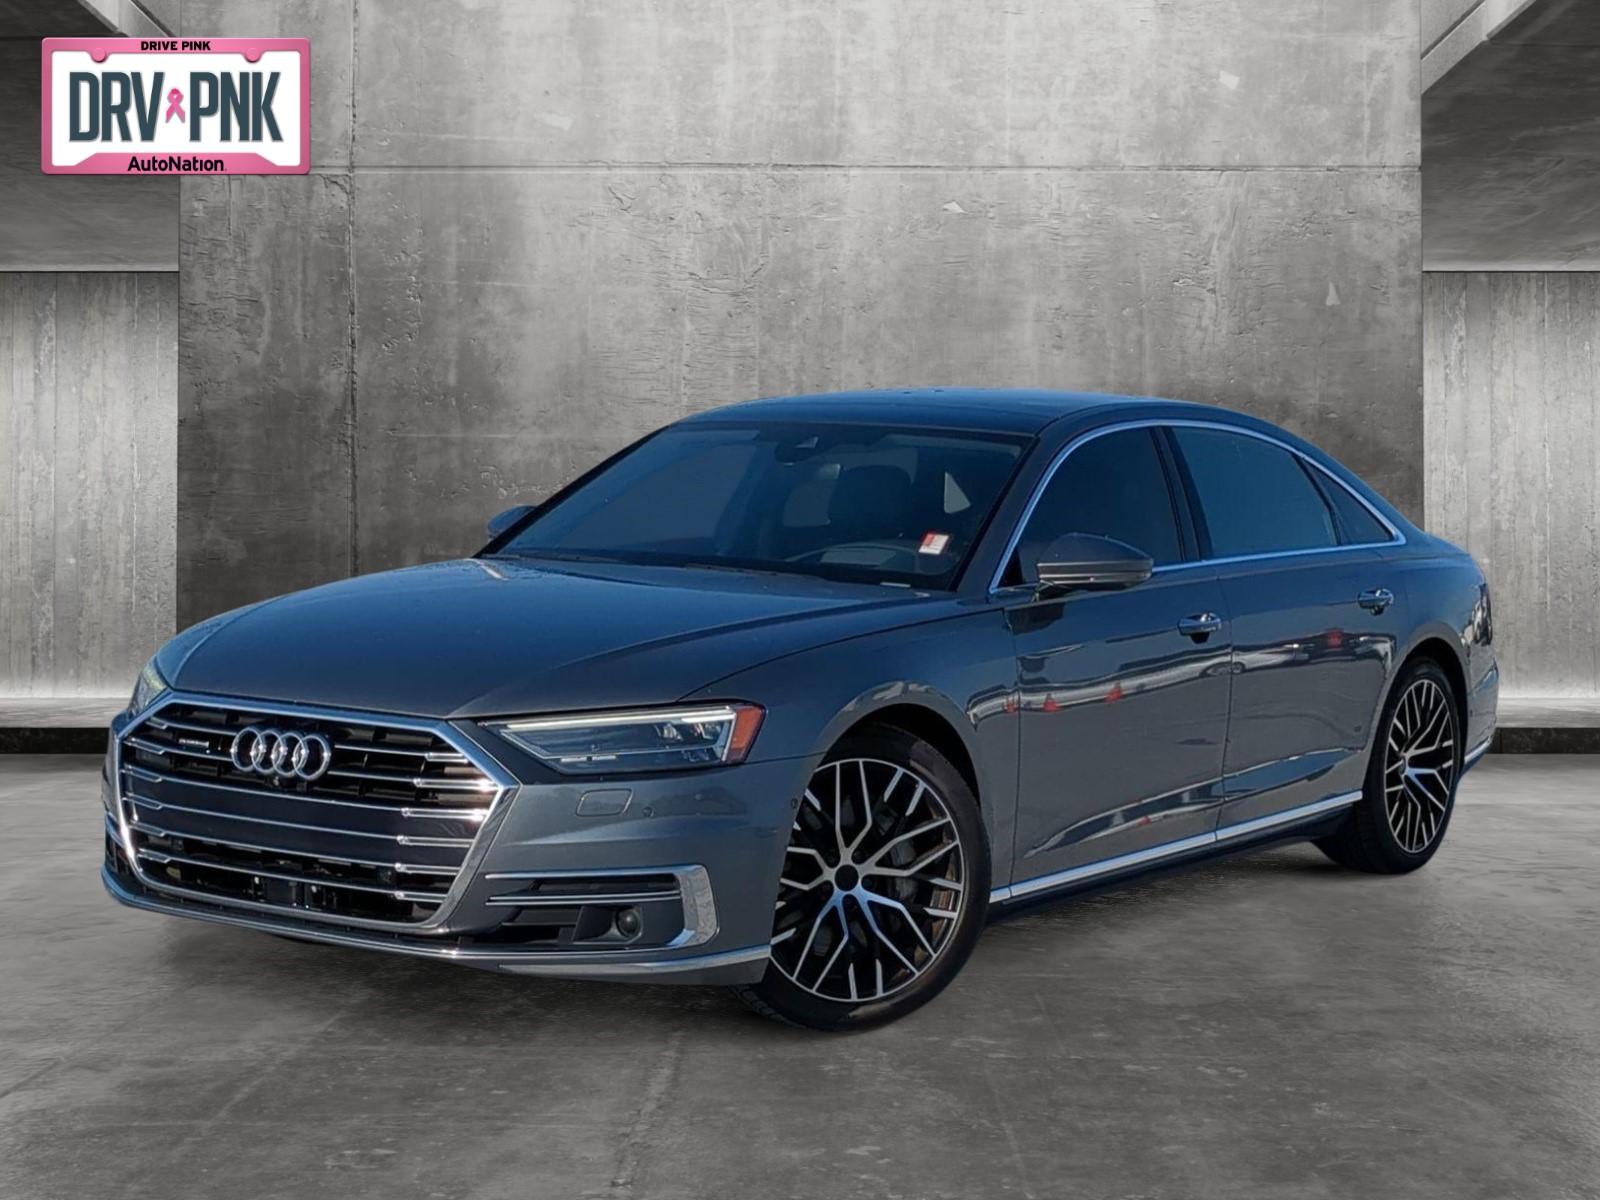 2019 Audi A8 L Vehicle Photo in Ft. Myers, FL 33907